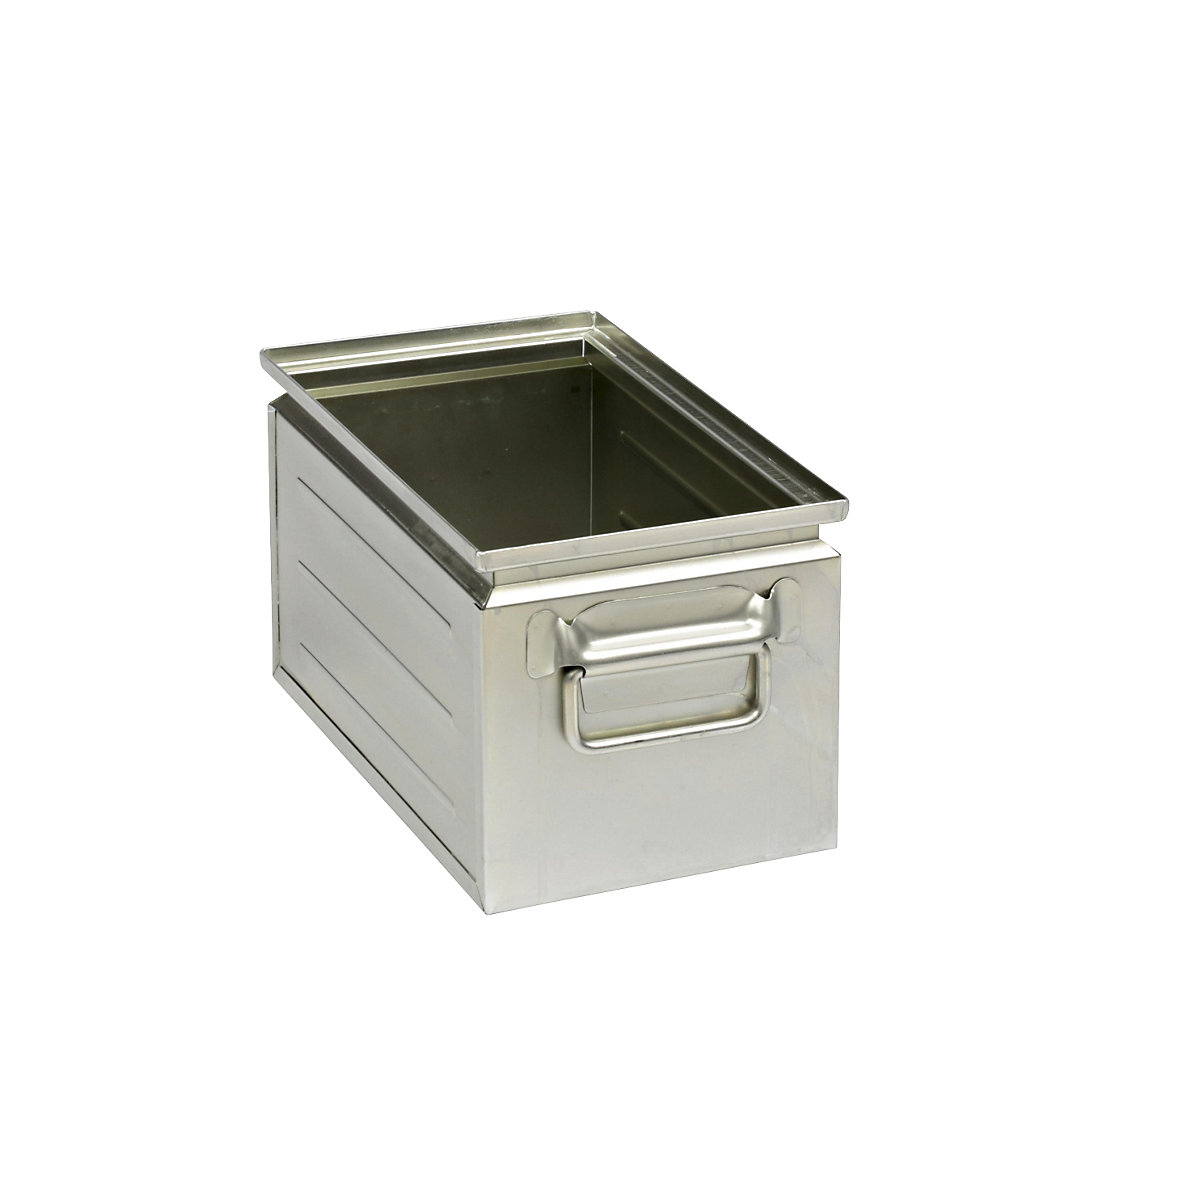 Stacking container made of sheet steel, capacity approx. 14 l, zinc plated